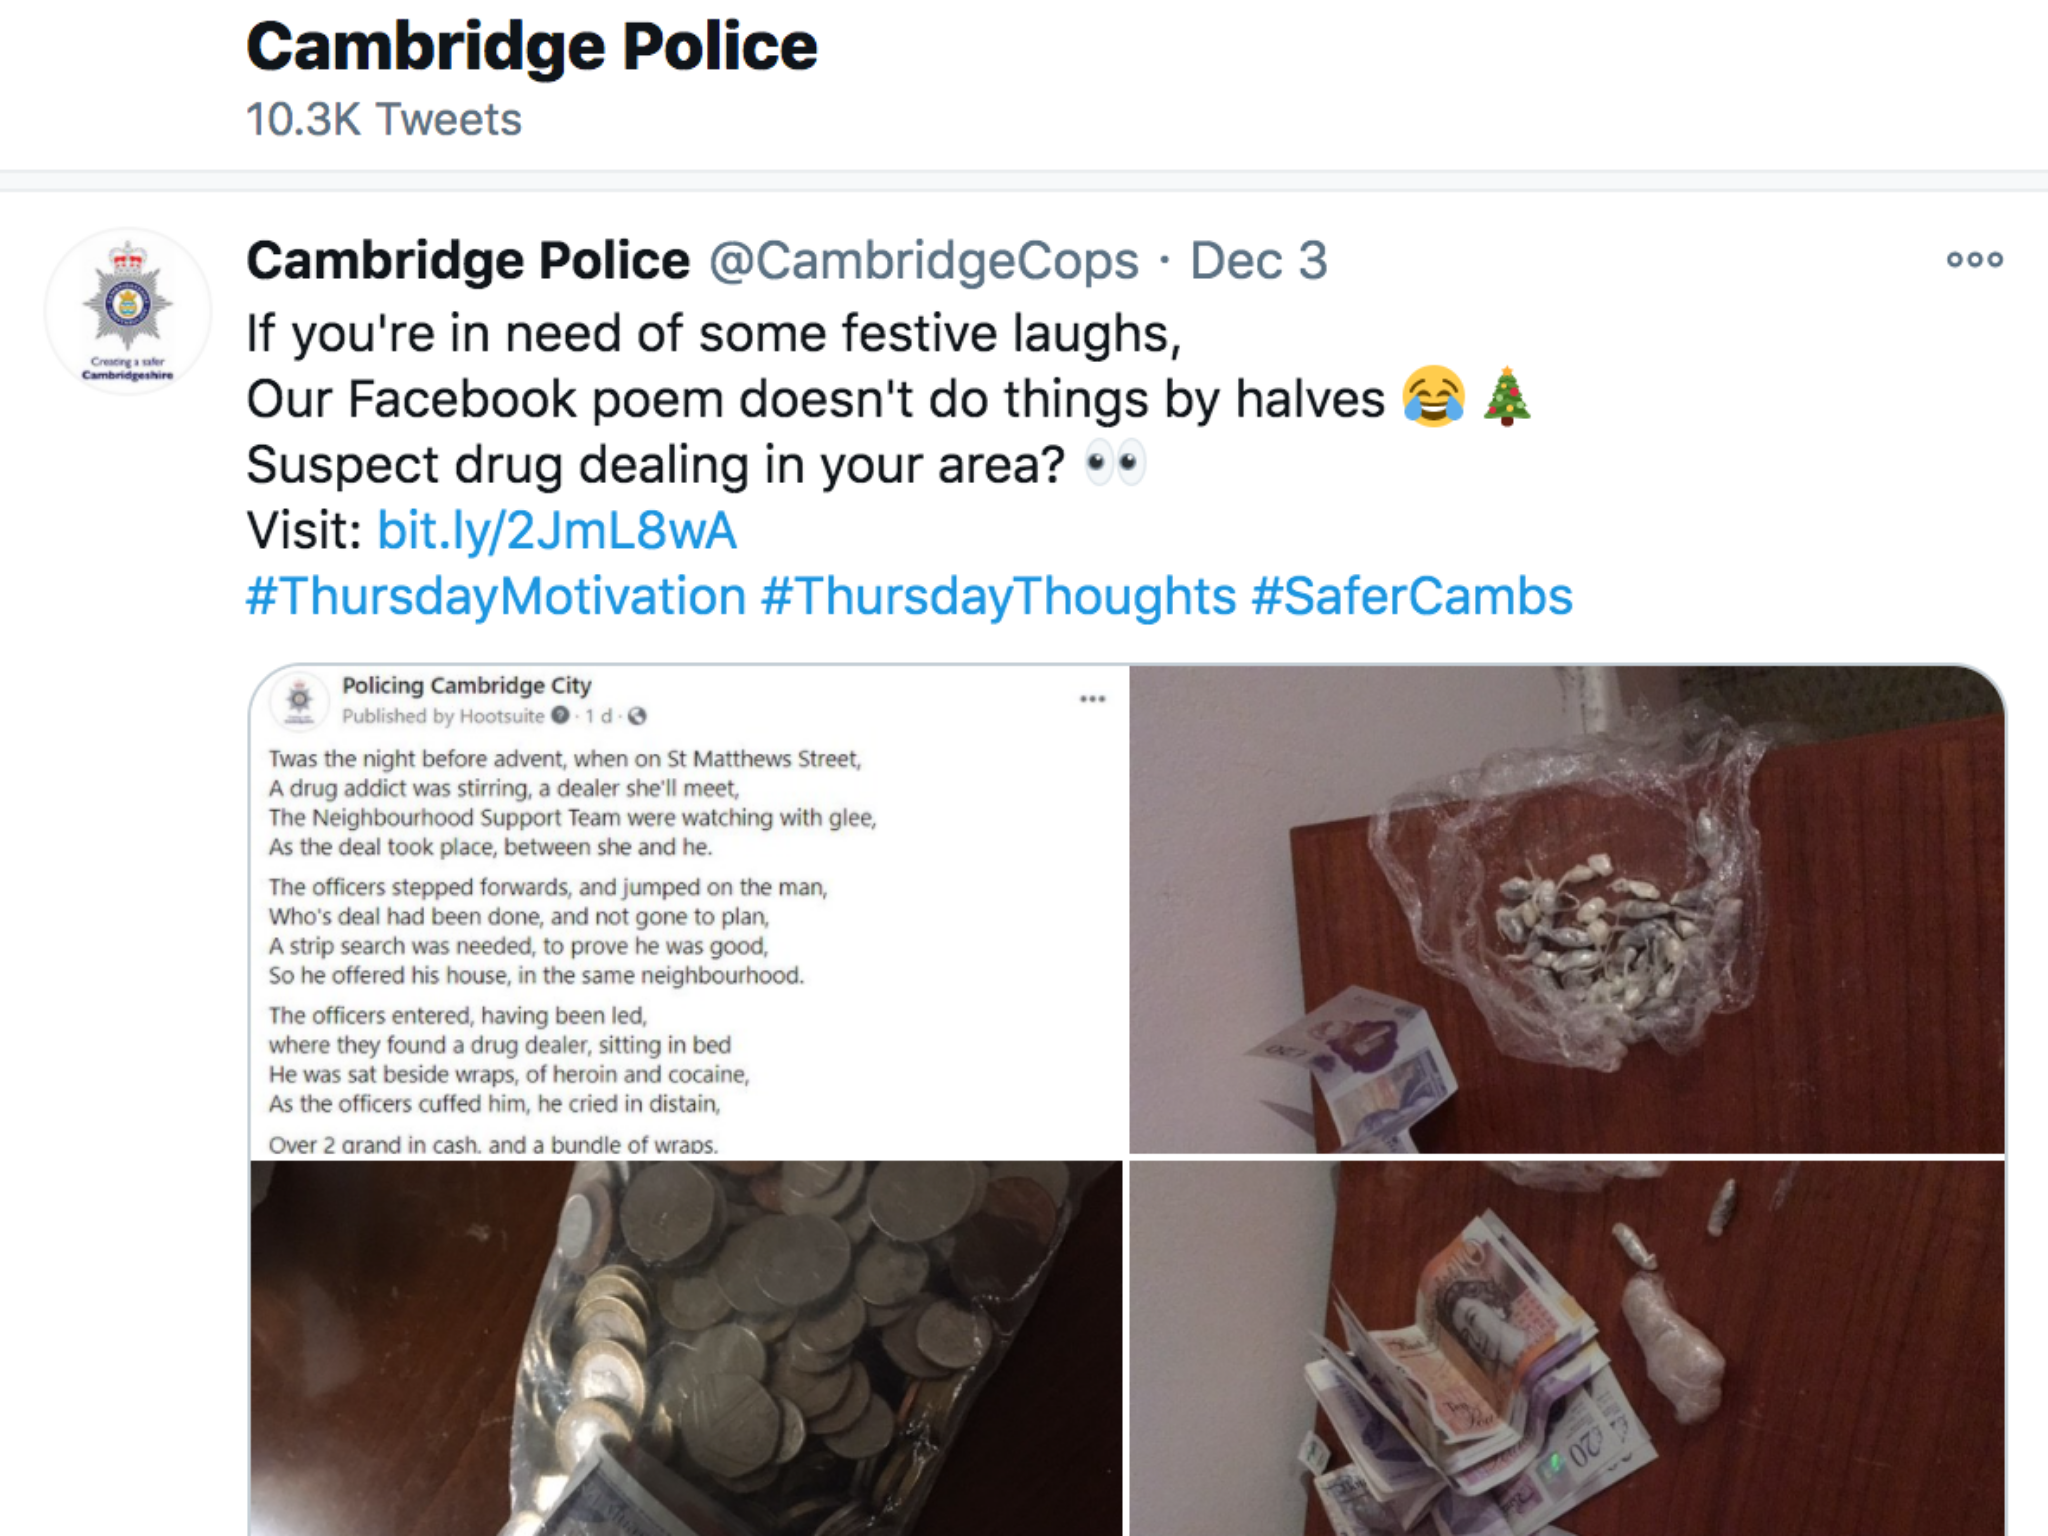 Cambridgeshire Constabulary shared a poem mocking possibly vulnerable arrestees for ‘festive laughs'